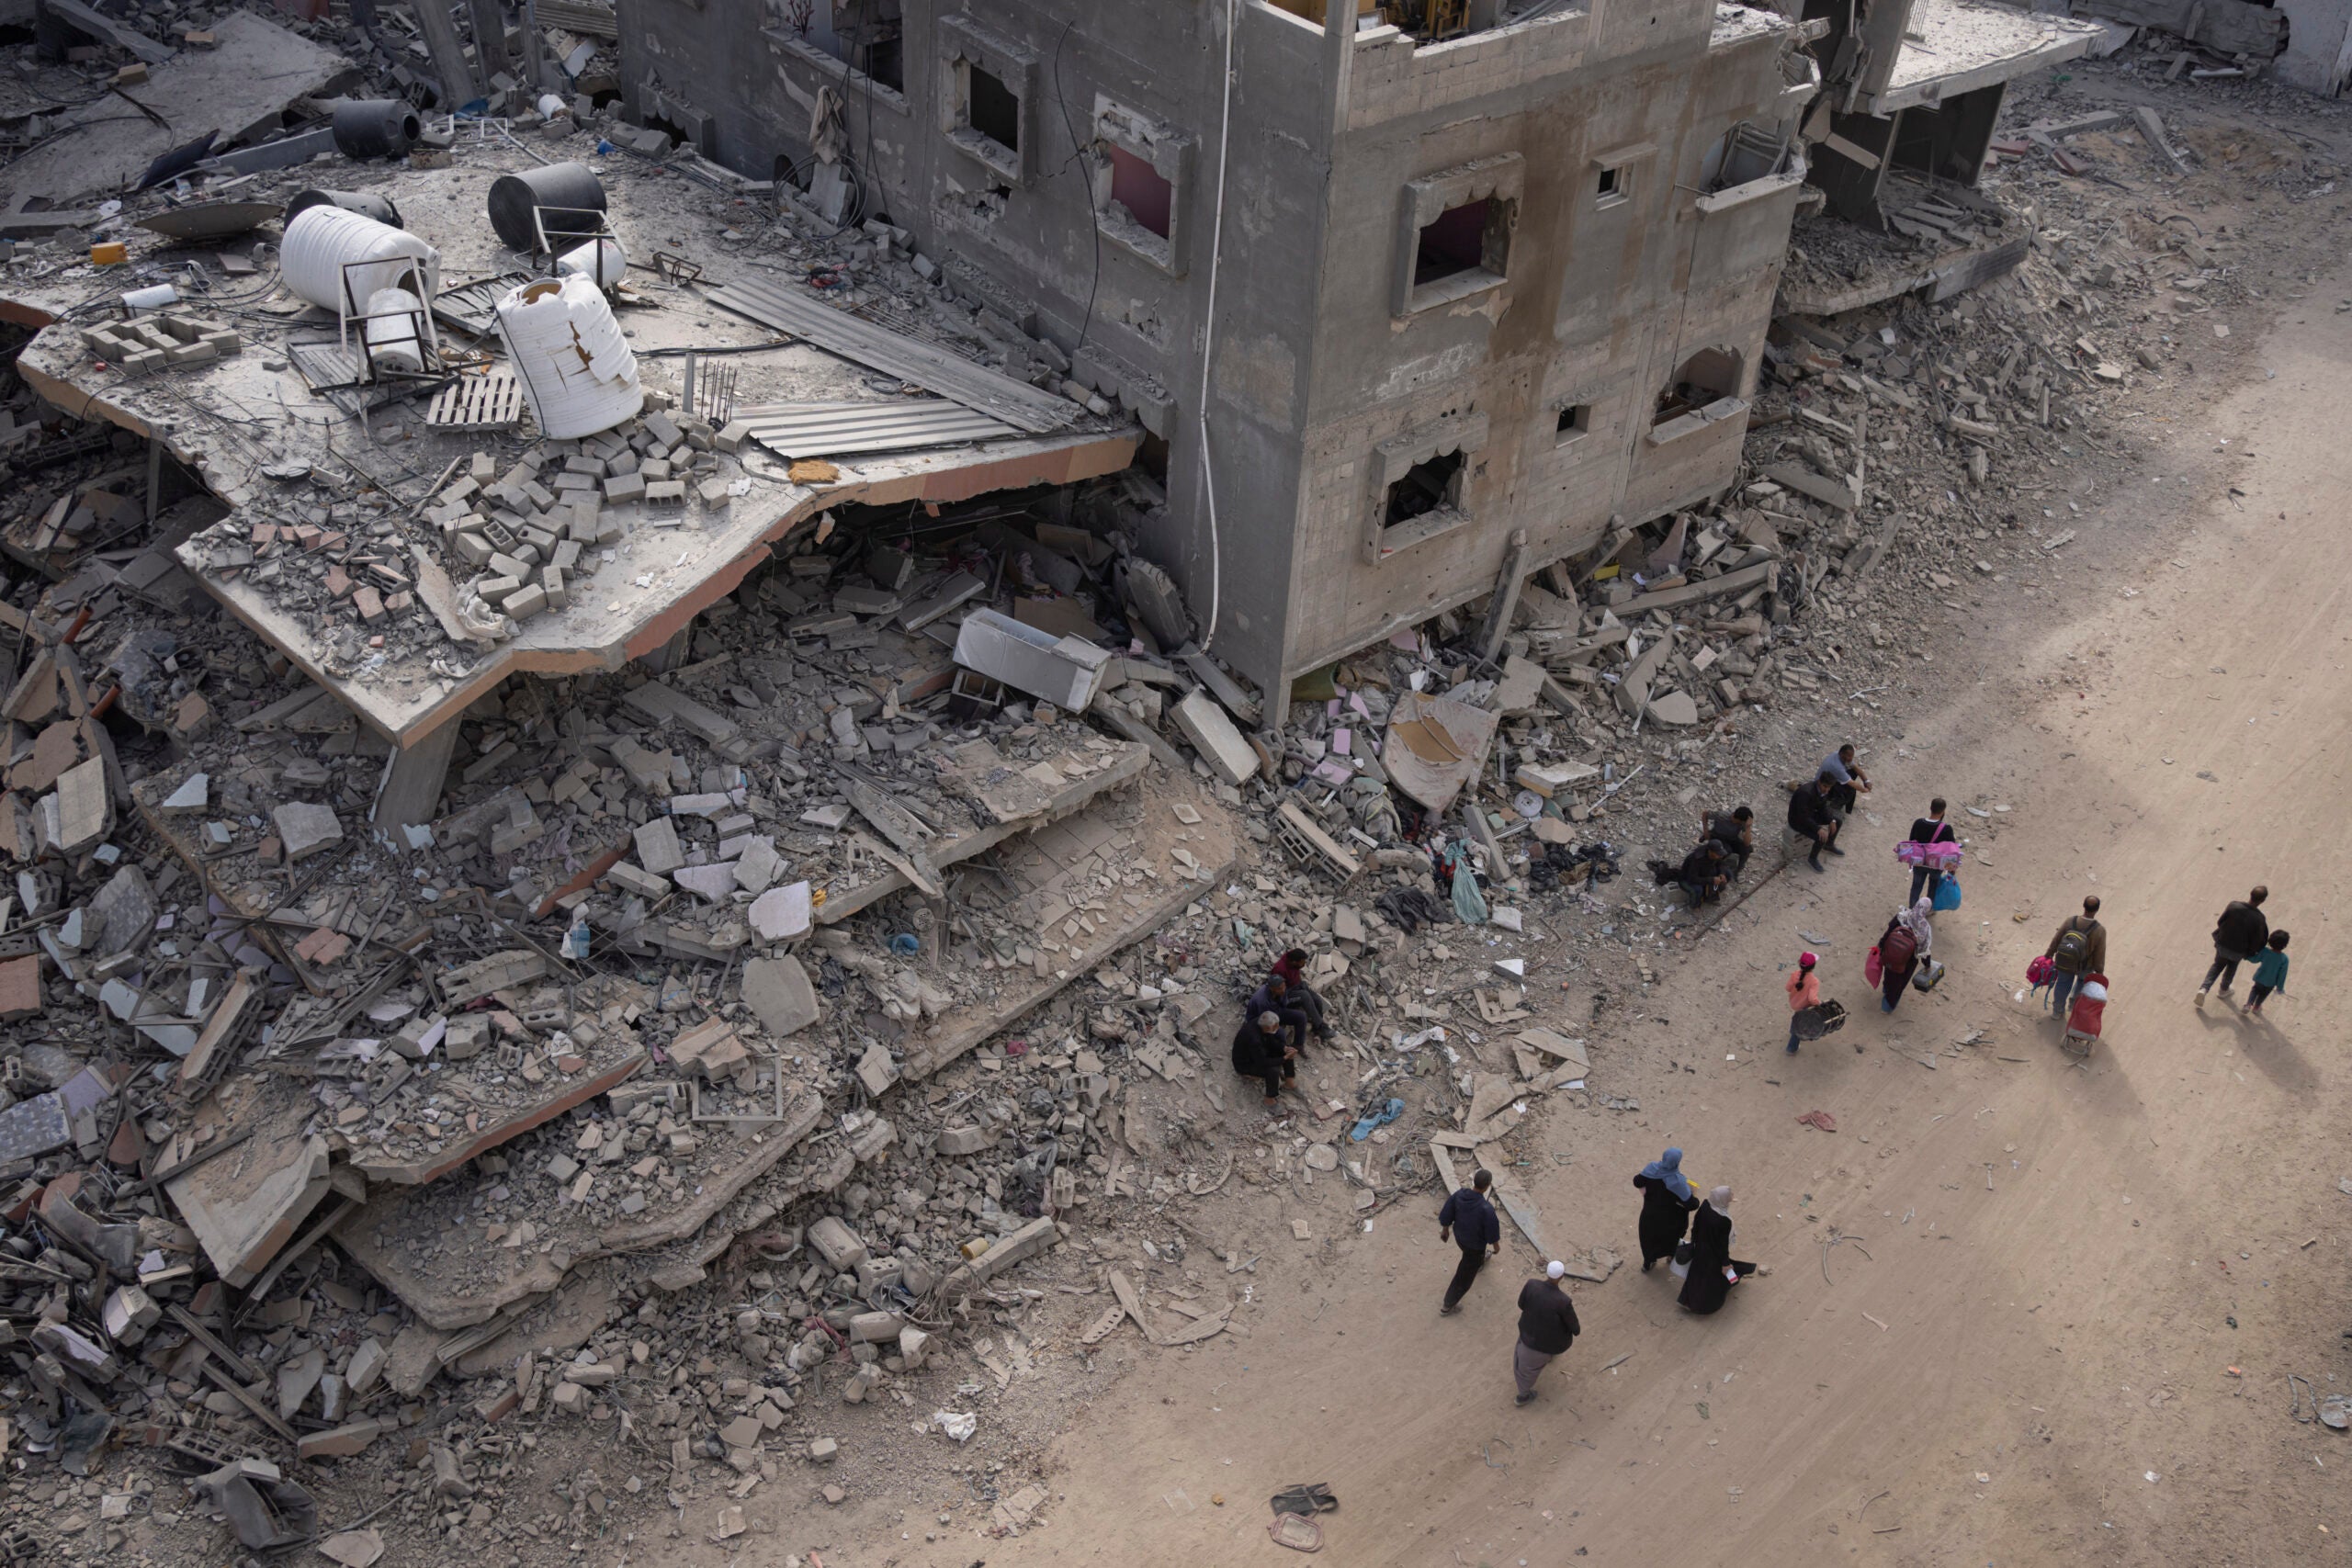 Palestinians walk through the destruction in the wake of an Israeli air and ground offensive in Khan Younis. 